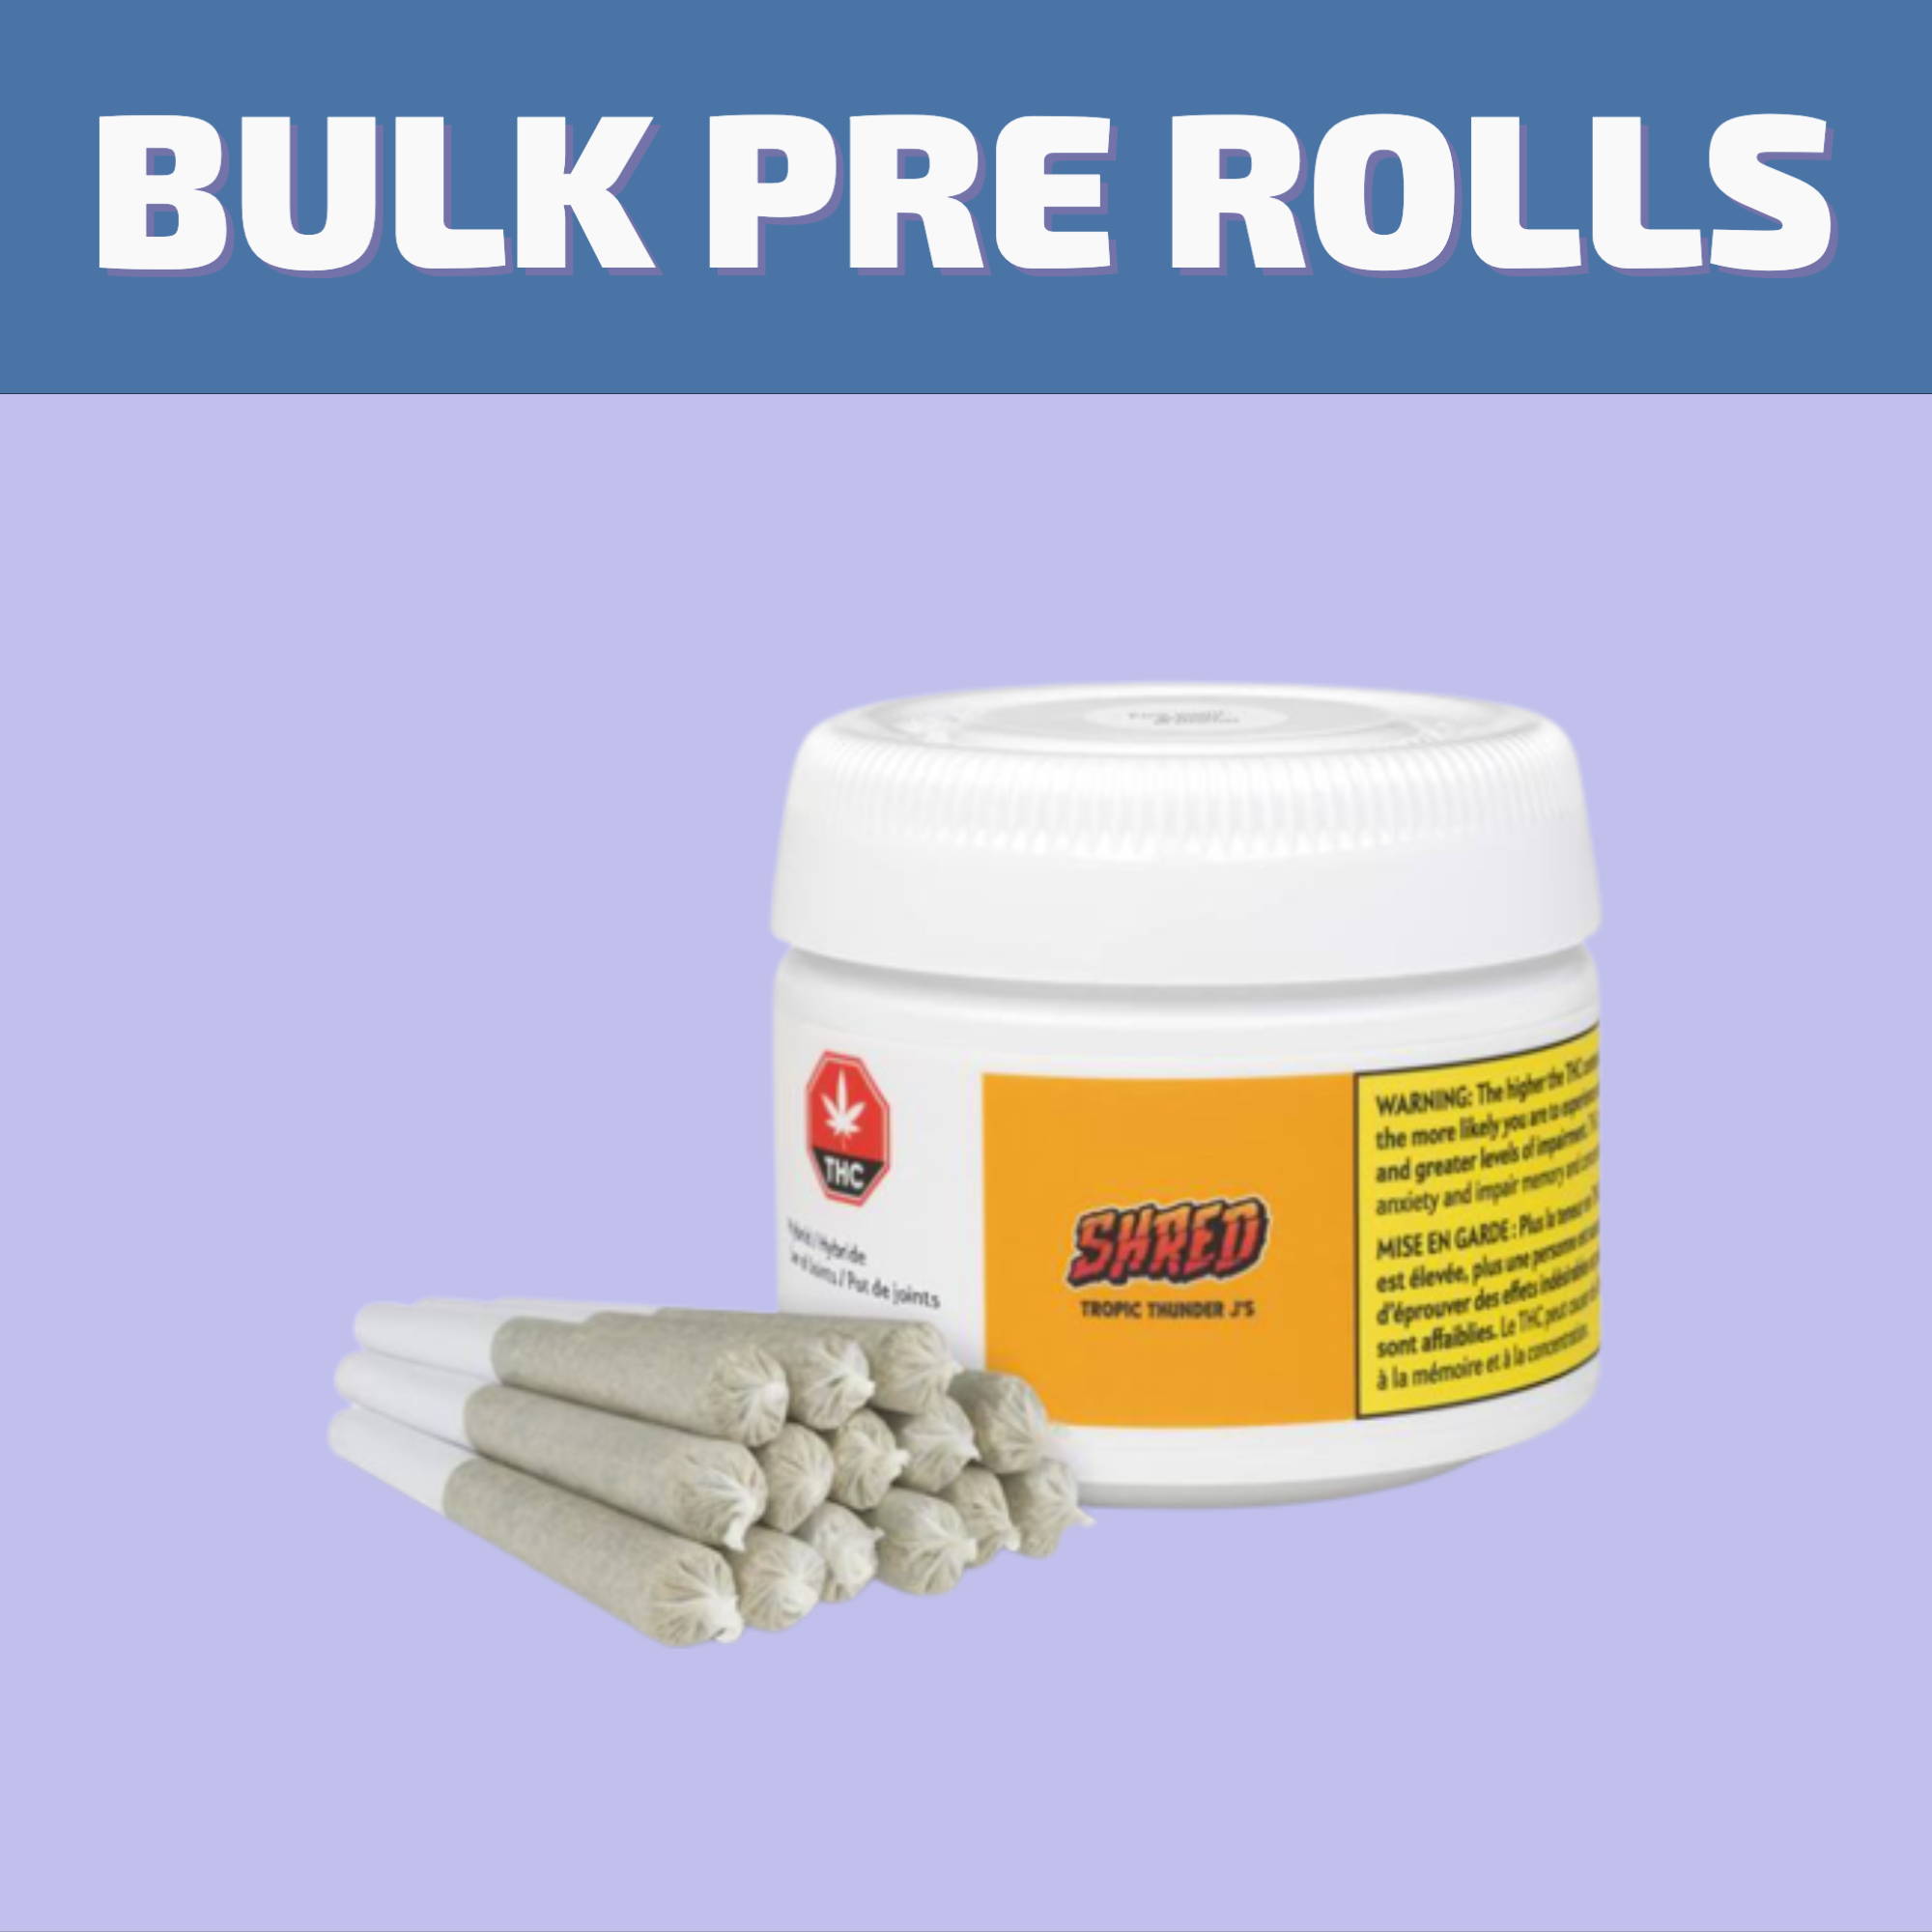 Order Bulk Pre Rolls that have 5 or more joints online for same day delivery in Winnipeg or visit our cannabis store on 580 Academy Road.  